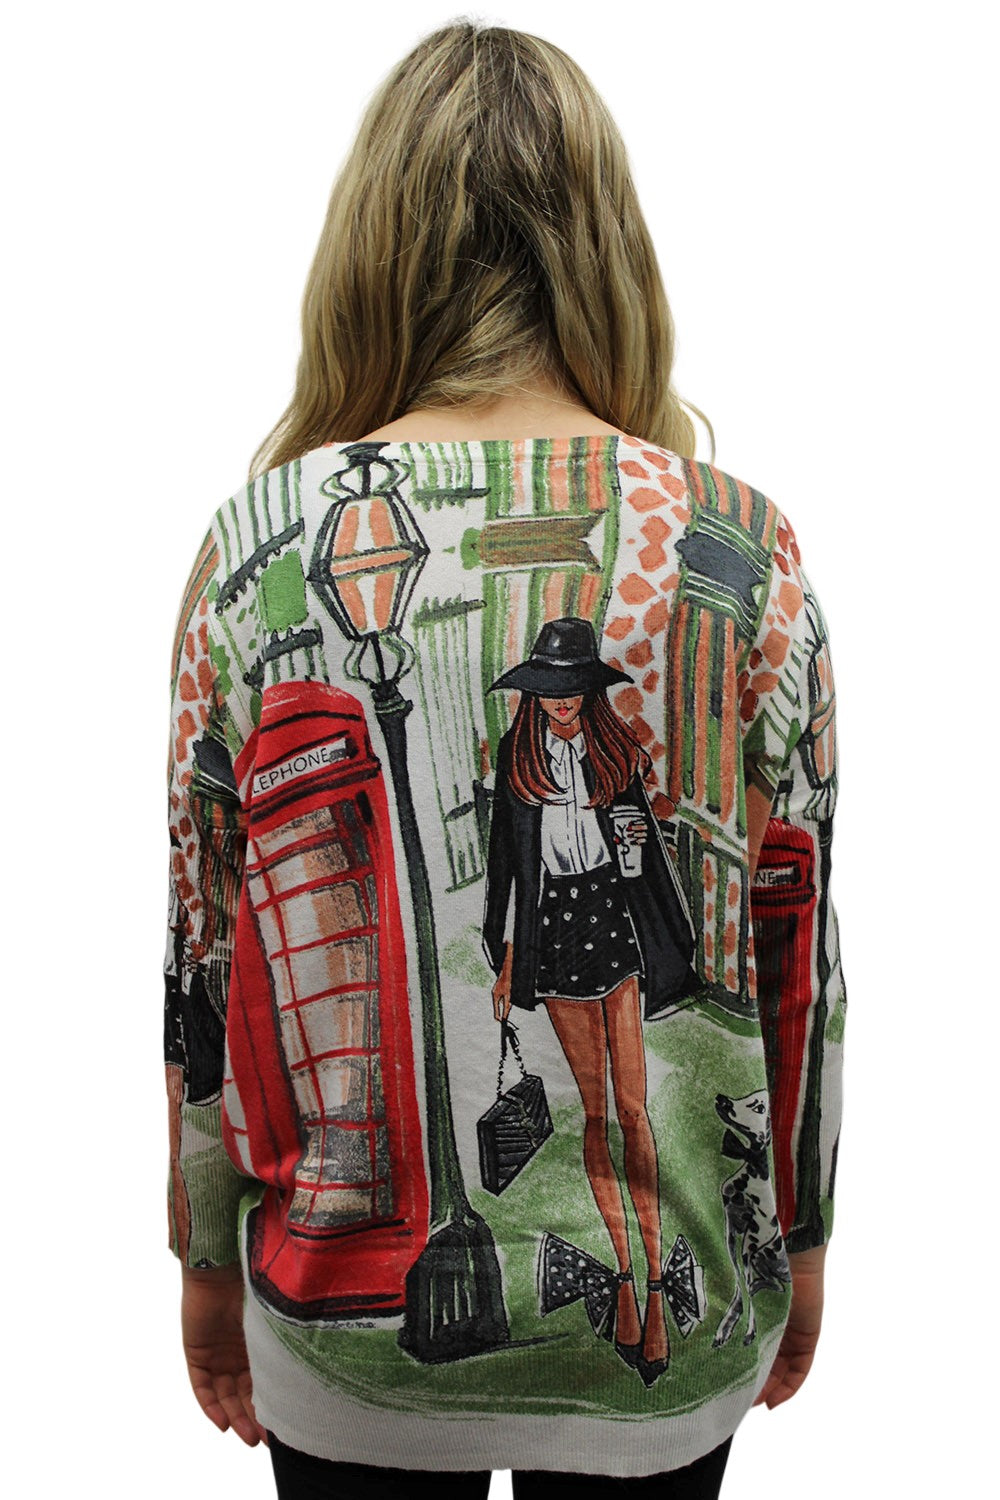 Fashion Lady With Telephone Box Print Sweater Top